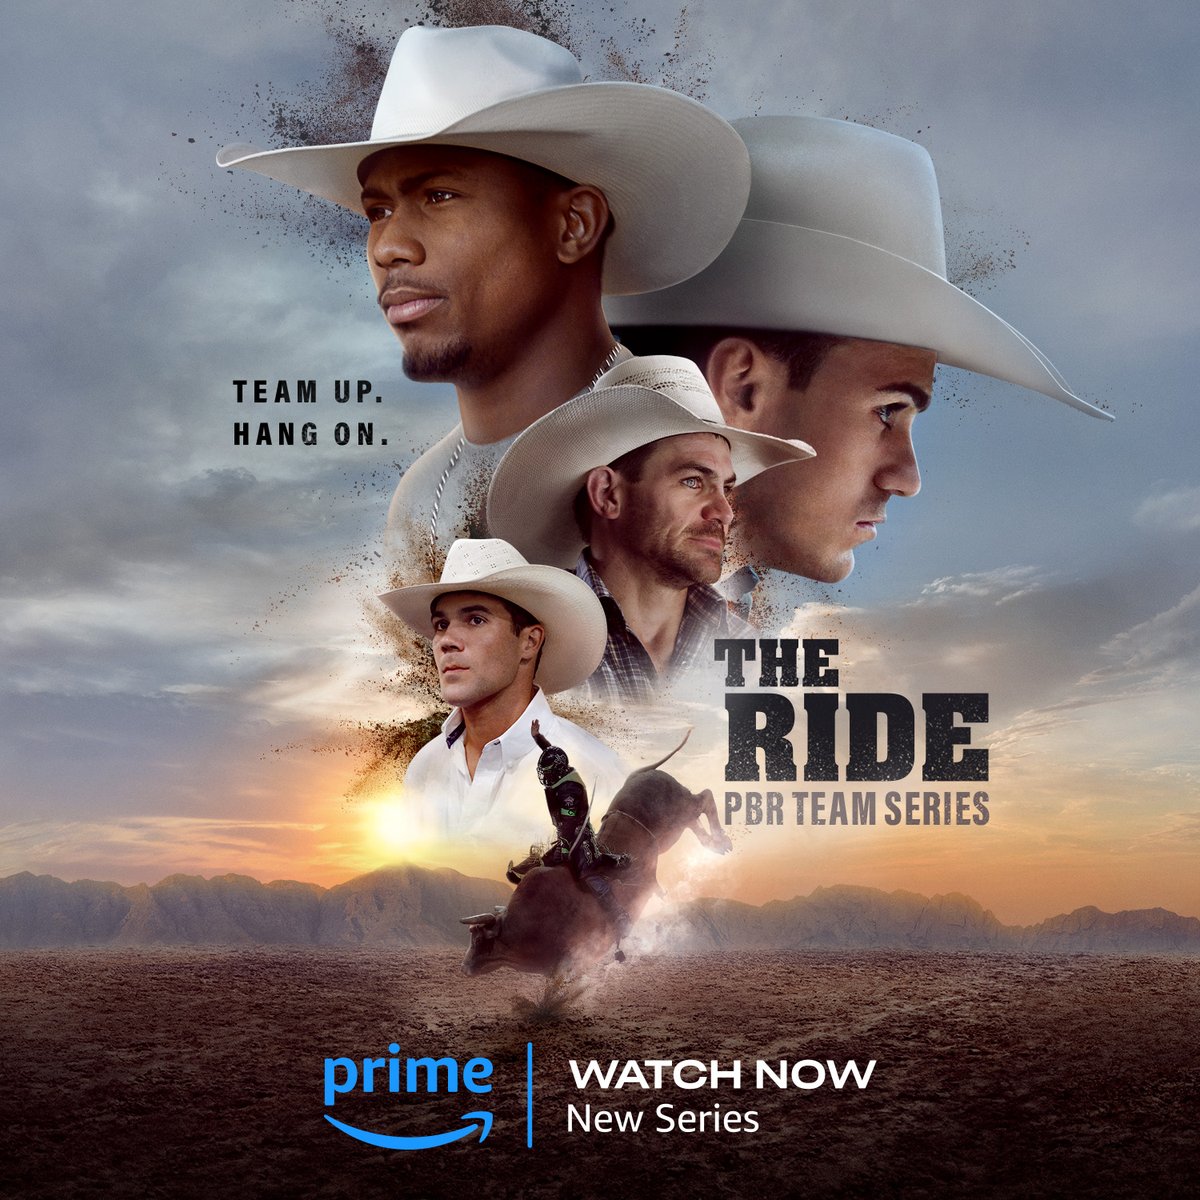 It's time to dive deep into the world of Team Bull Riding with the new 8 part docuseries, The Ride, on Prime Video now. #TheRidePBR Follow the link to watch: shorturl.at/huHLR